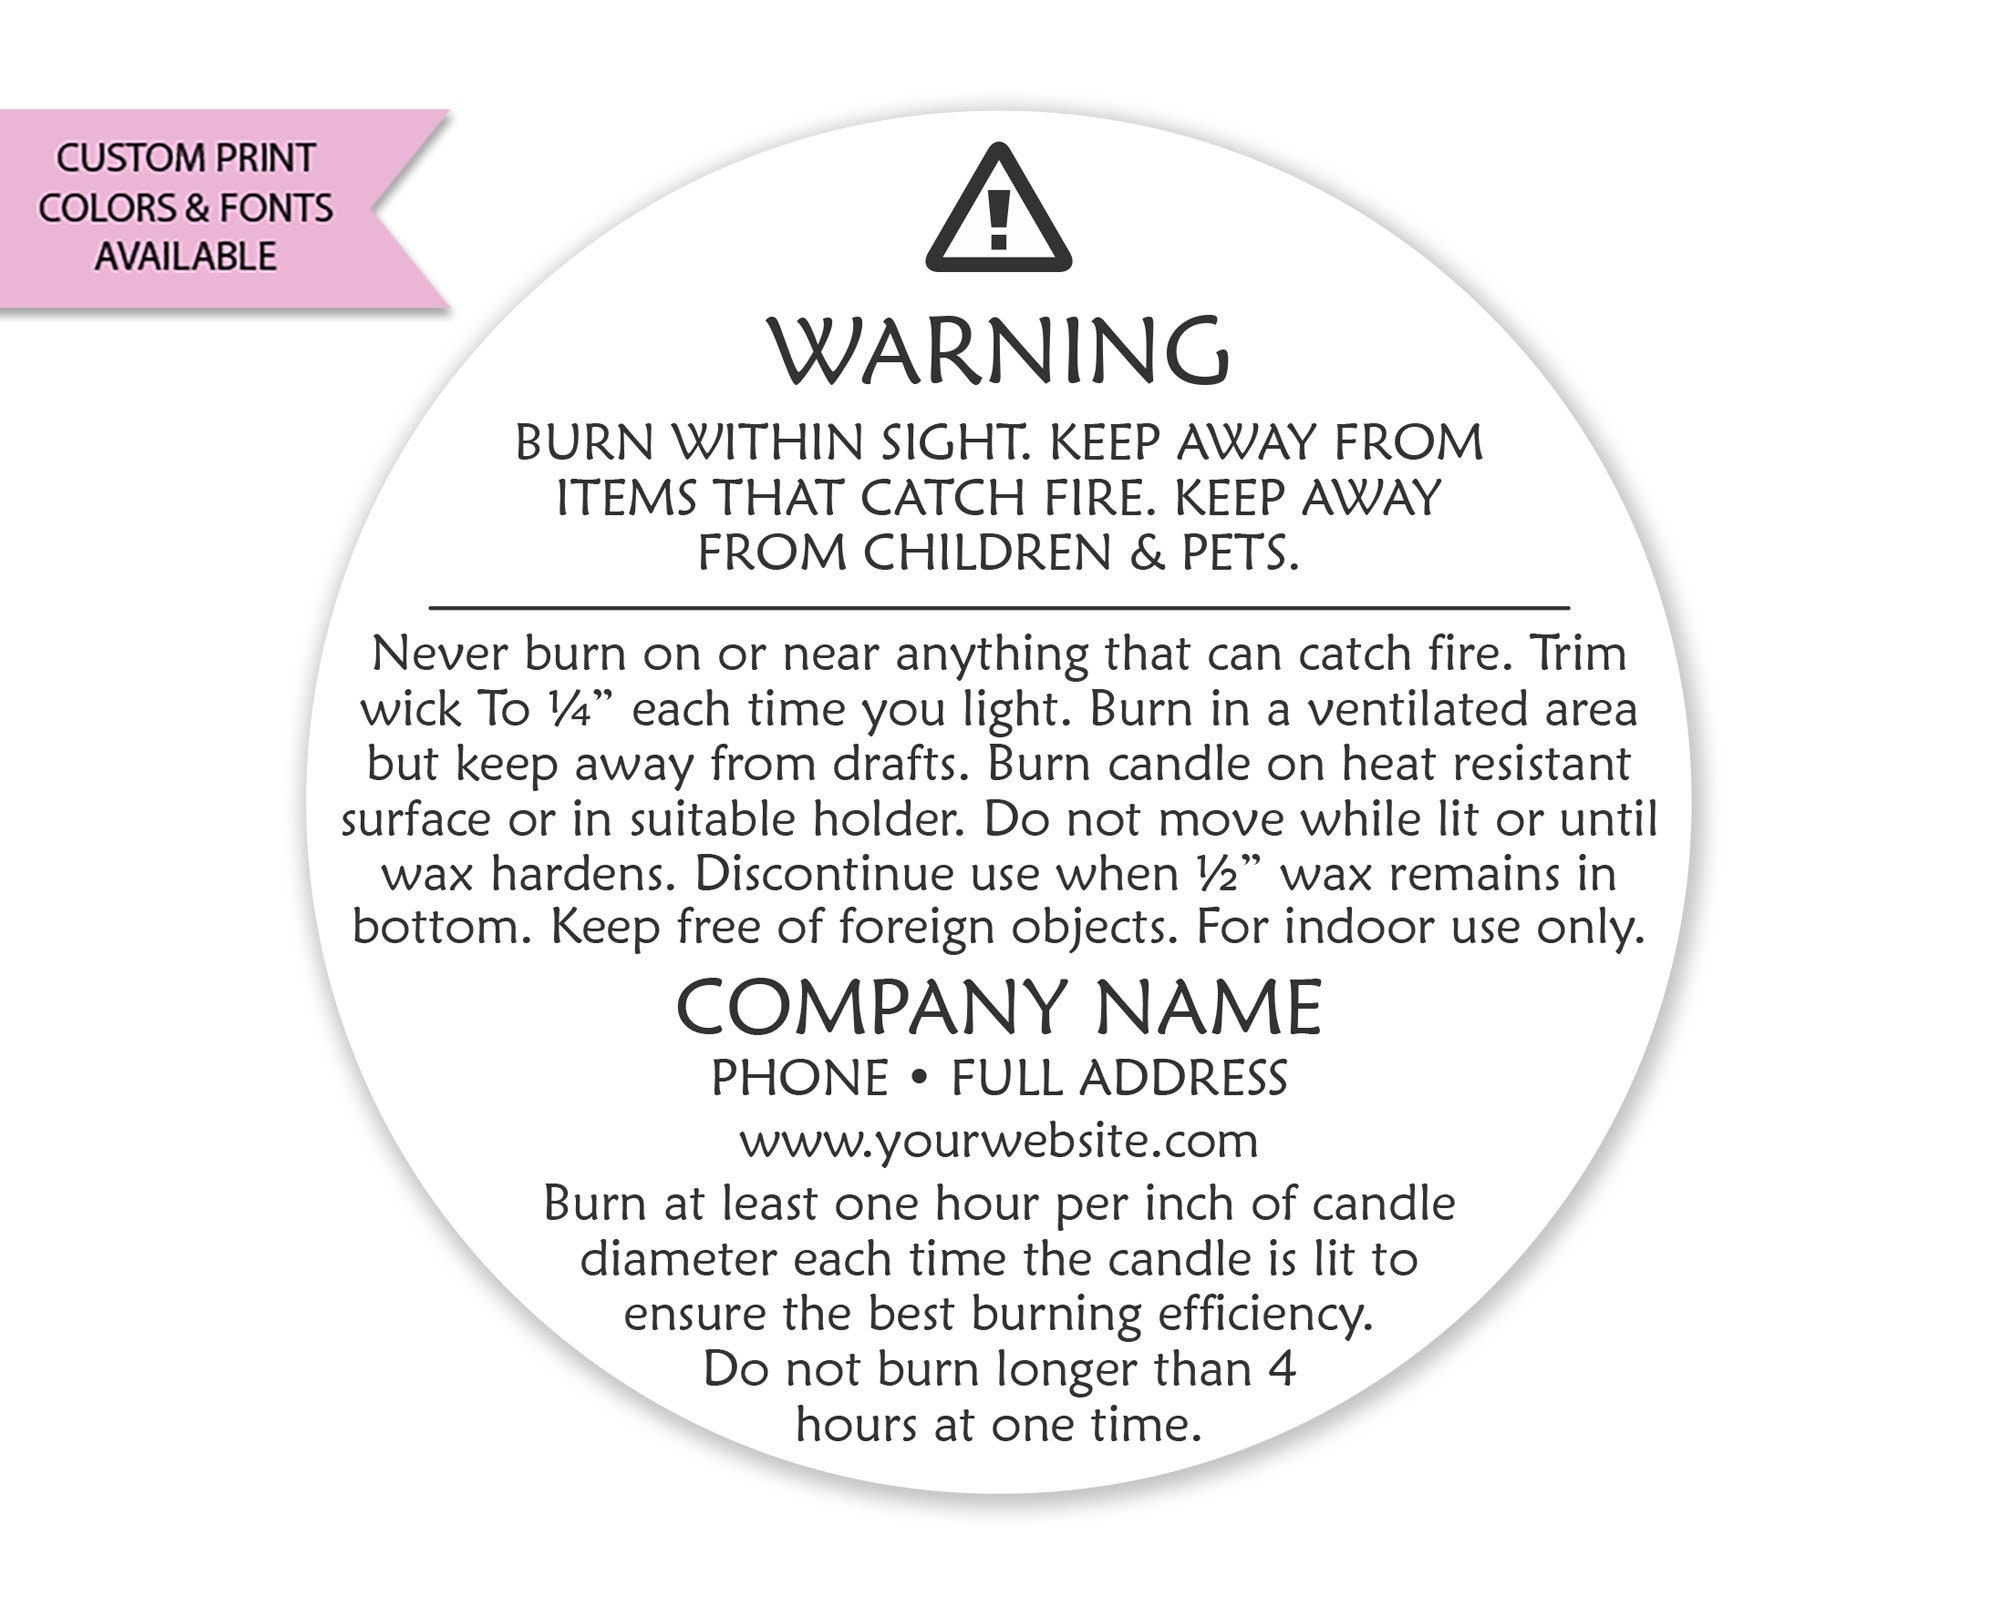 2-IN Round ~ BURNING CANDLE WARNING STICKERS LABELS CAUTION KIMMERIC